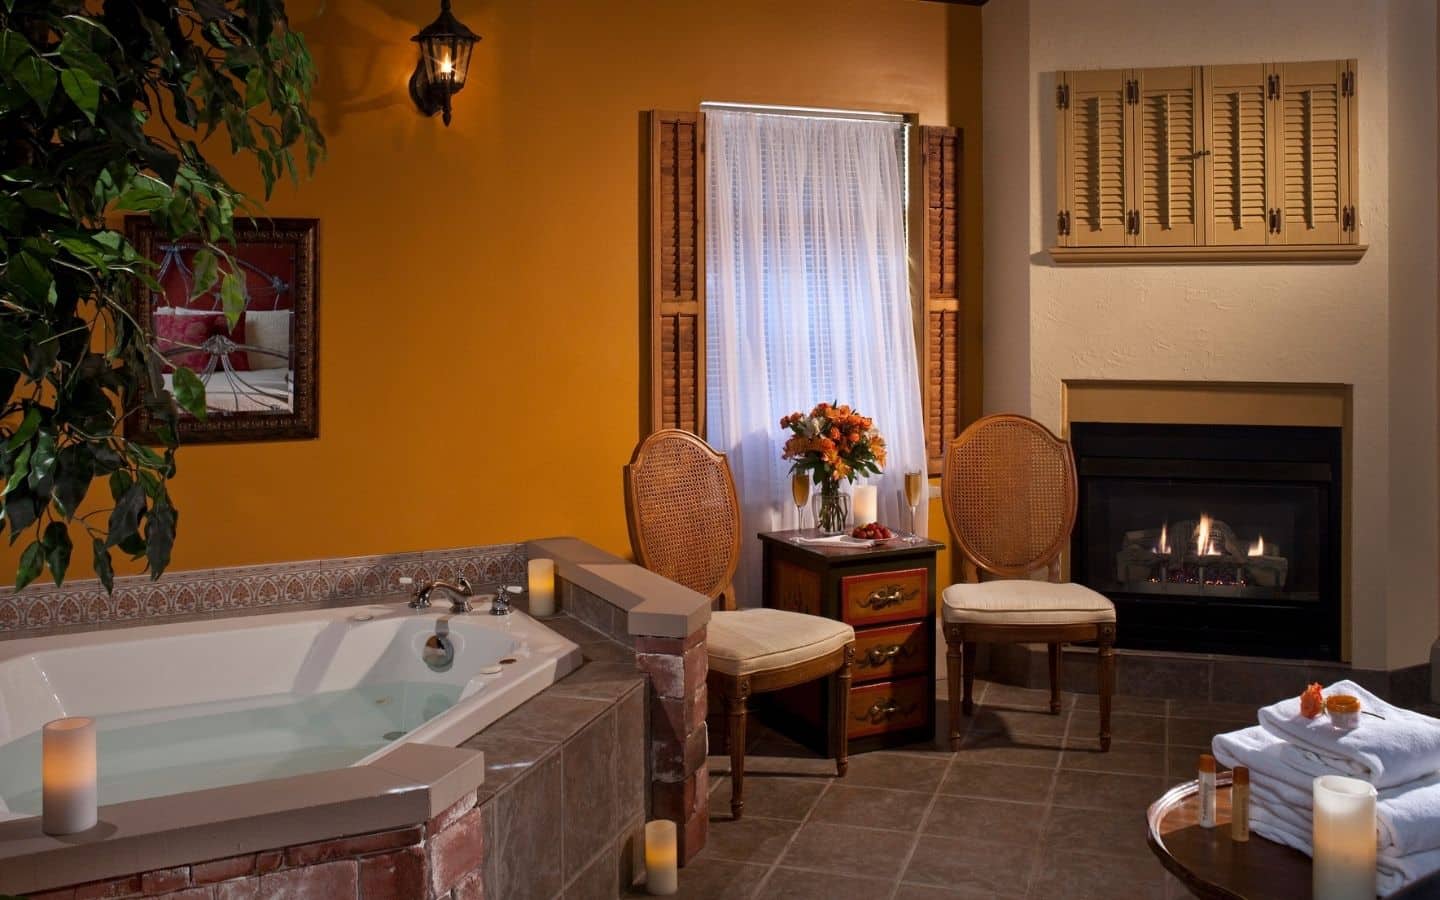 Guest room with warm tan walls, jetted tub and cozy fireplace